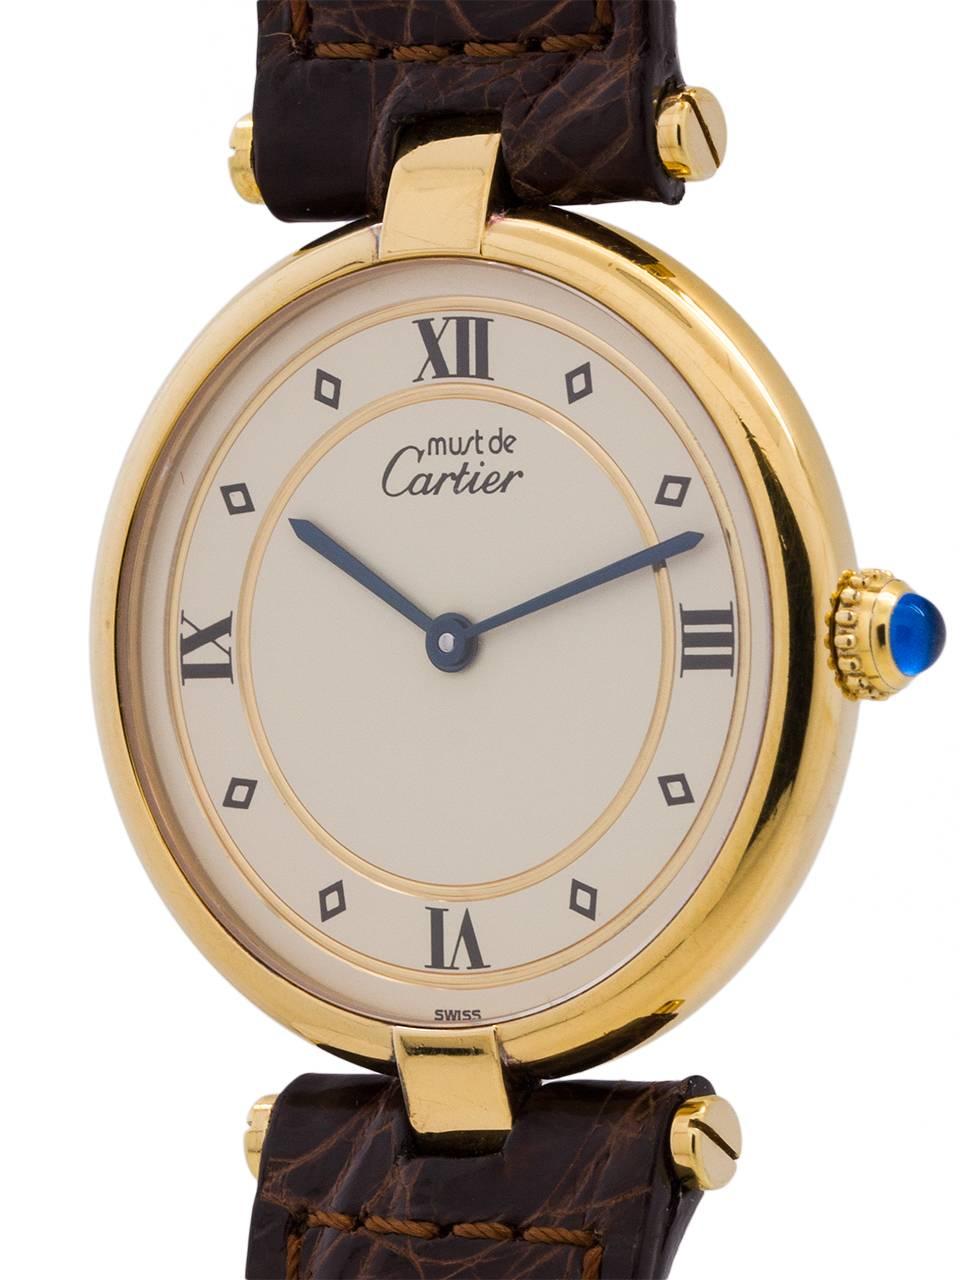 Cartier Man’s vermeil Vendome Tank Must de Cartier circa 1990s. Featuring a 30.5 x 37mm round case with “T bar” lugs and sapphire crystal. Classic cream dial with black roman numerals, blue steeled hands, and blue cabachon sapphire crown. Battery